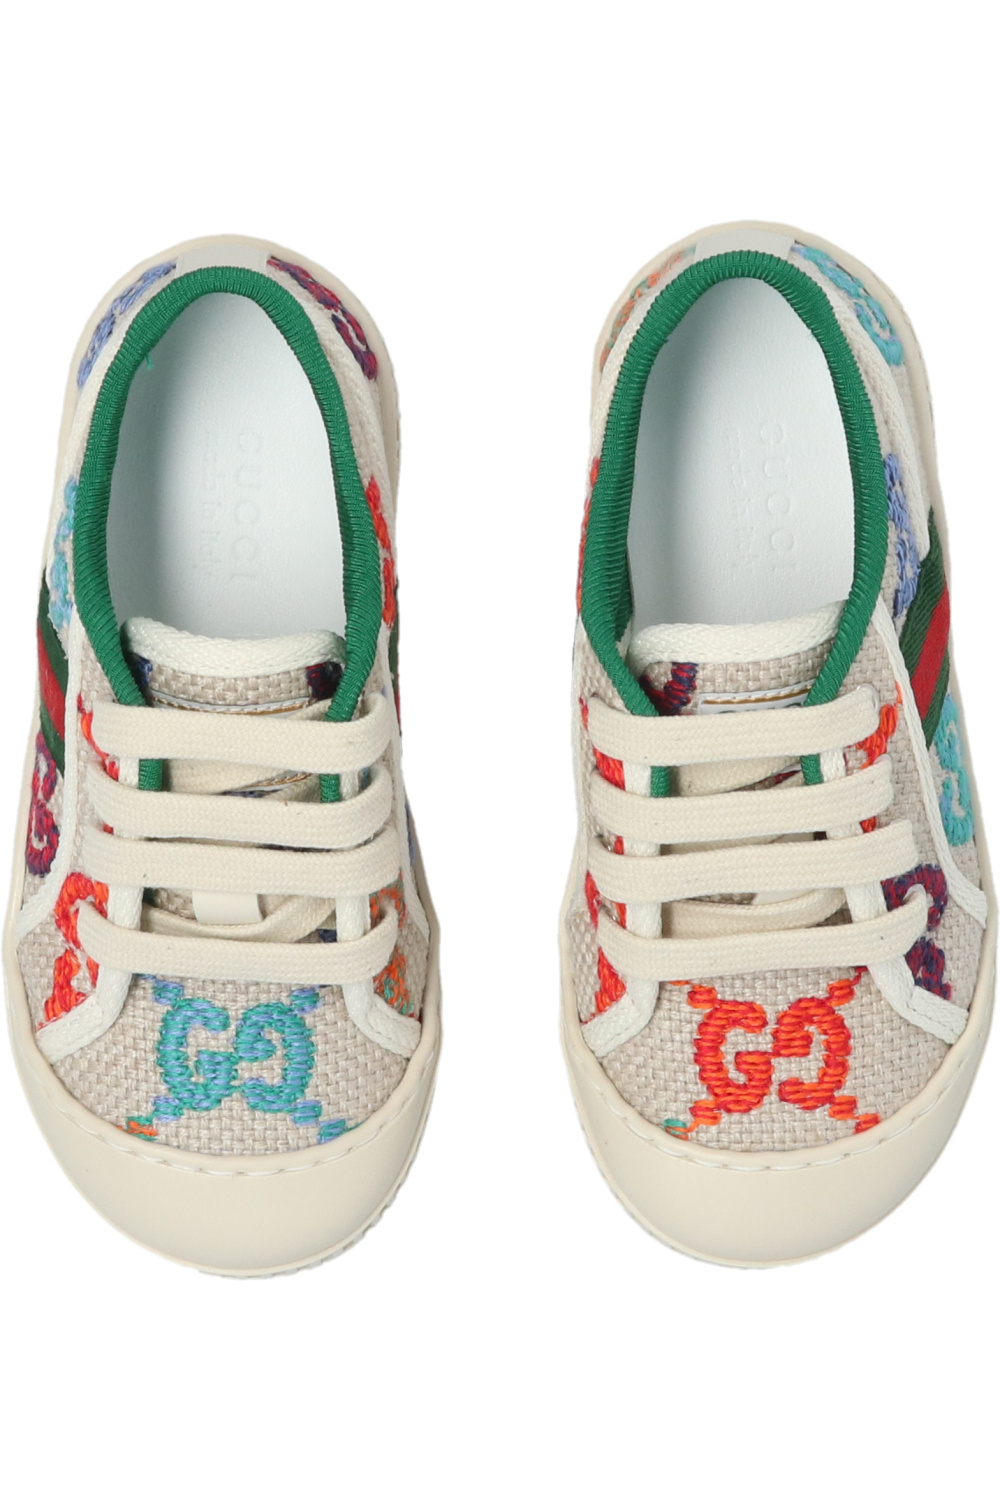 Gucci Kids Logo-embroidered sneakers